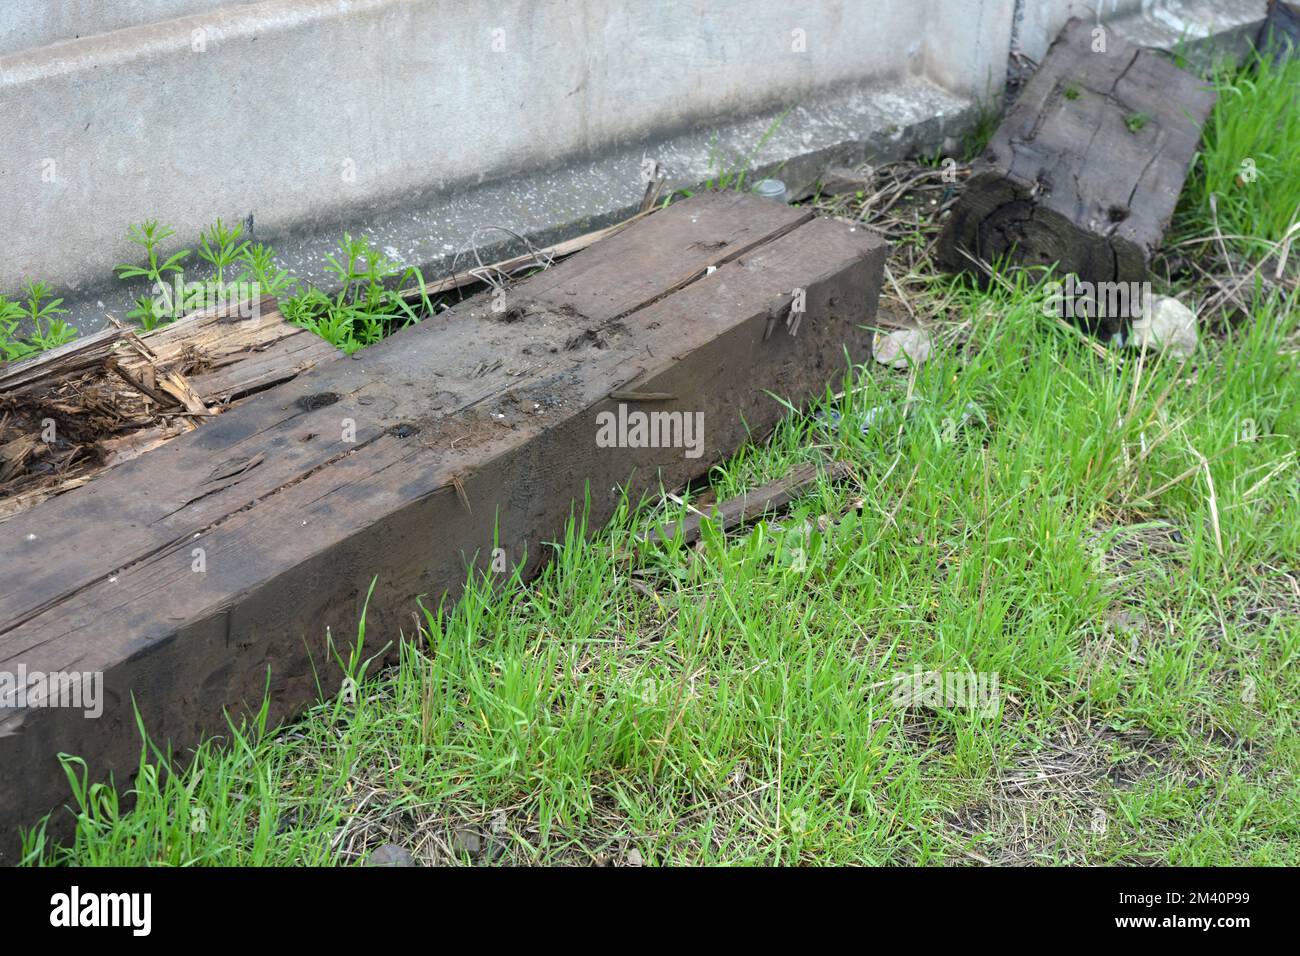 Large old wood that has dried up over time and from wear. It served and was used on the old railway track, lay under the metal ruts. Stock Photo